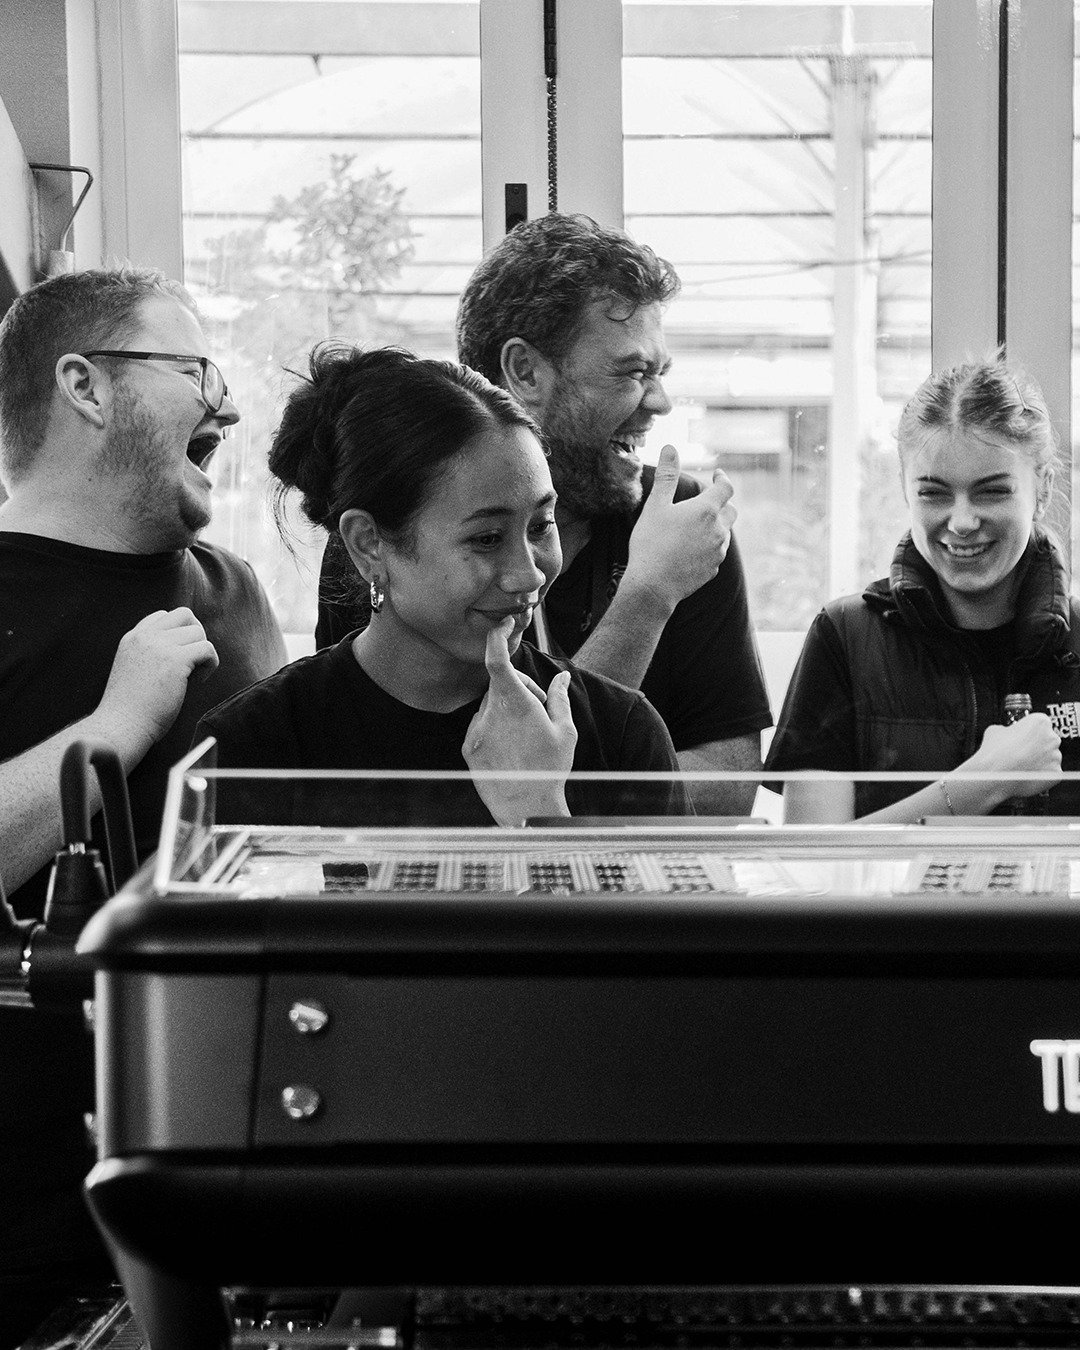 ✨ So thrilled to unveil our new coffee machine from L'affare ☕️ 

Our staff stuck around after hours to see the @laffare  team work their magic during installation and have a little meet and greet over 🍕. Our baristas can't wait to play with their n